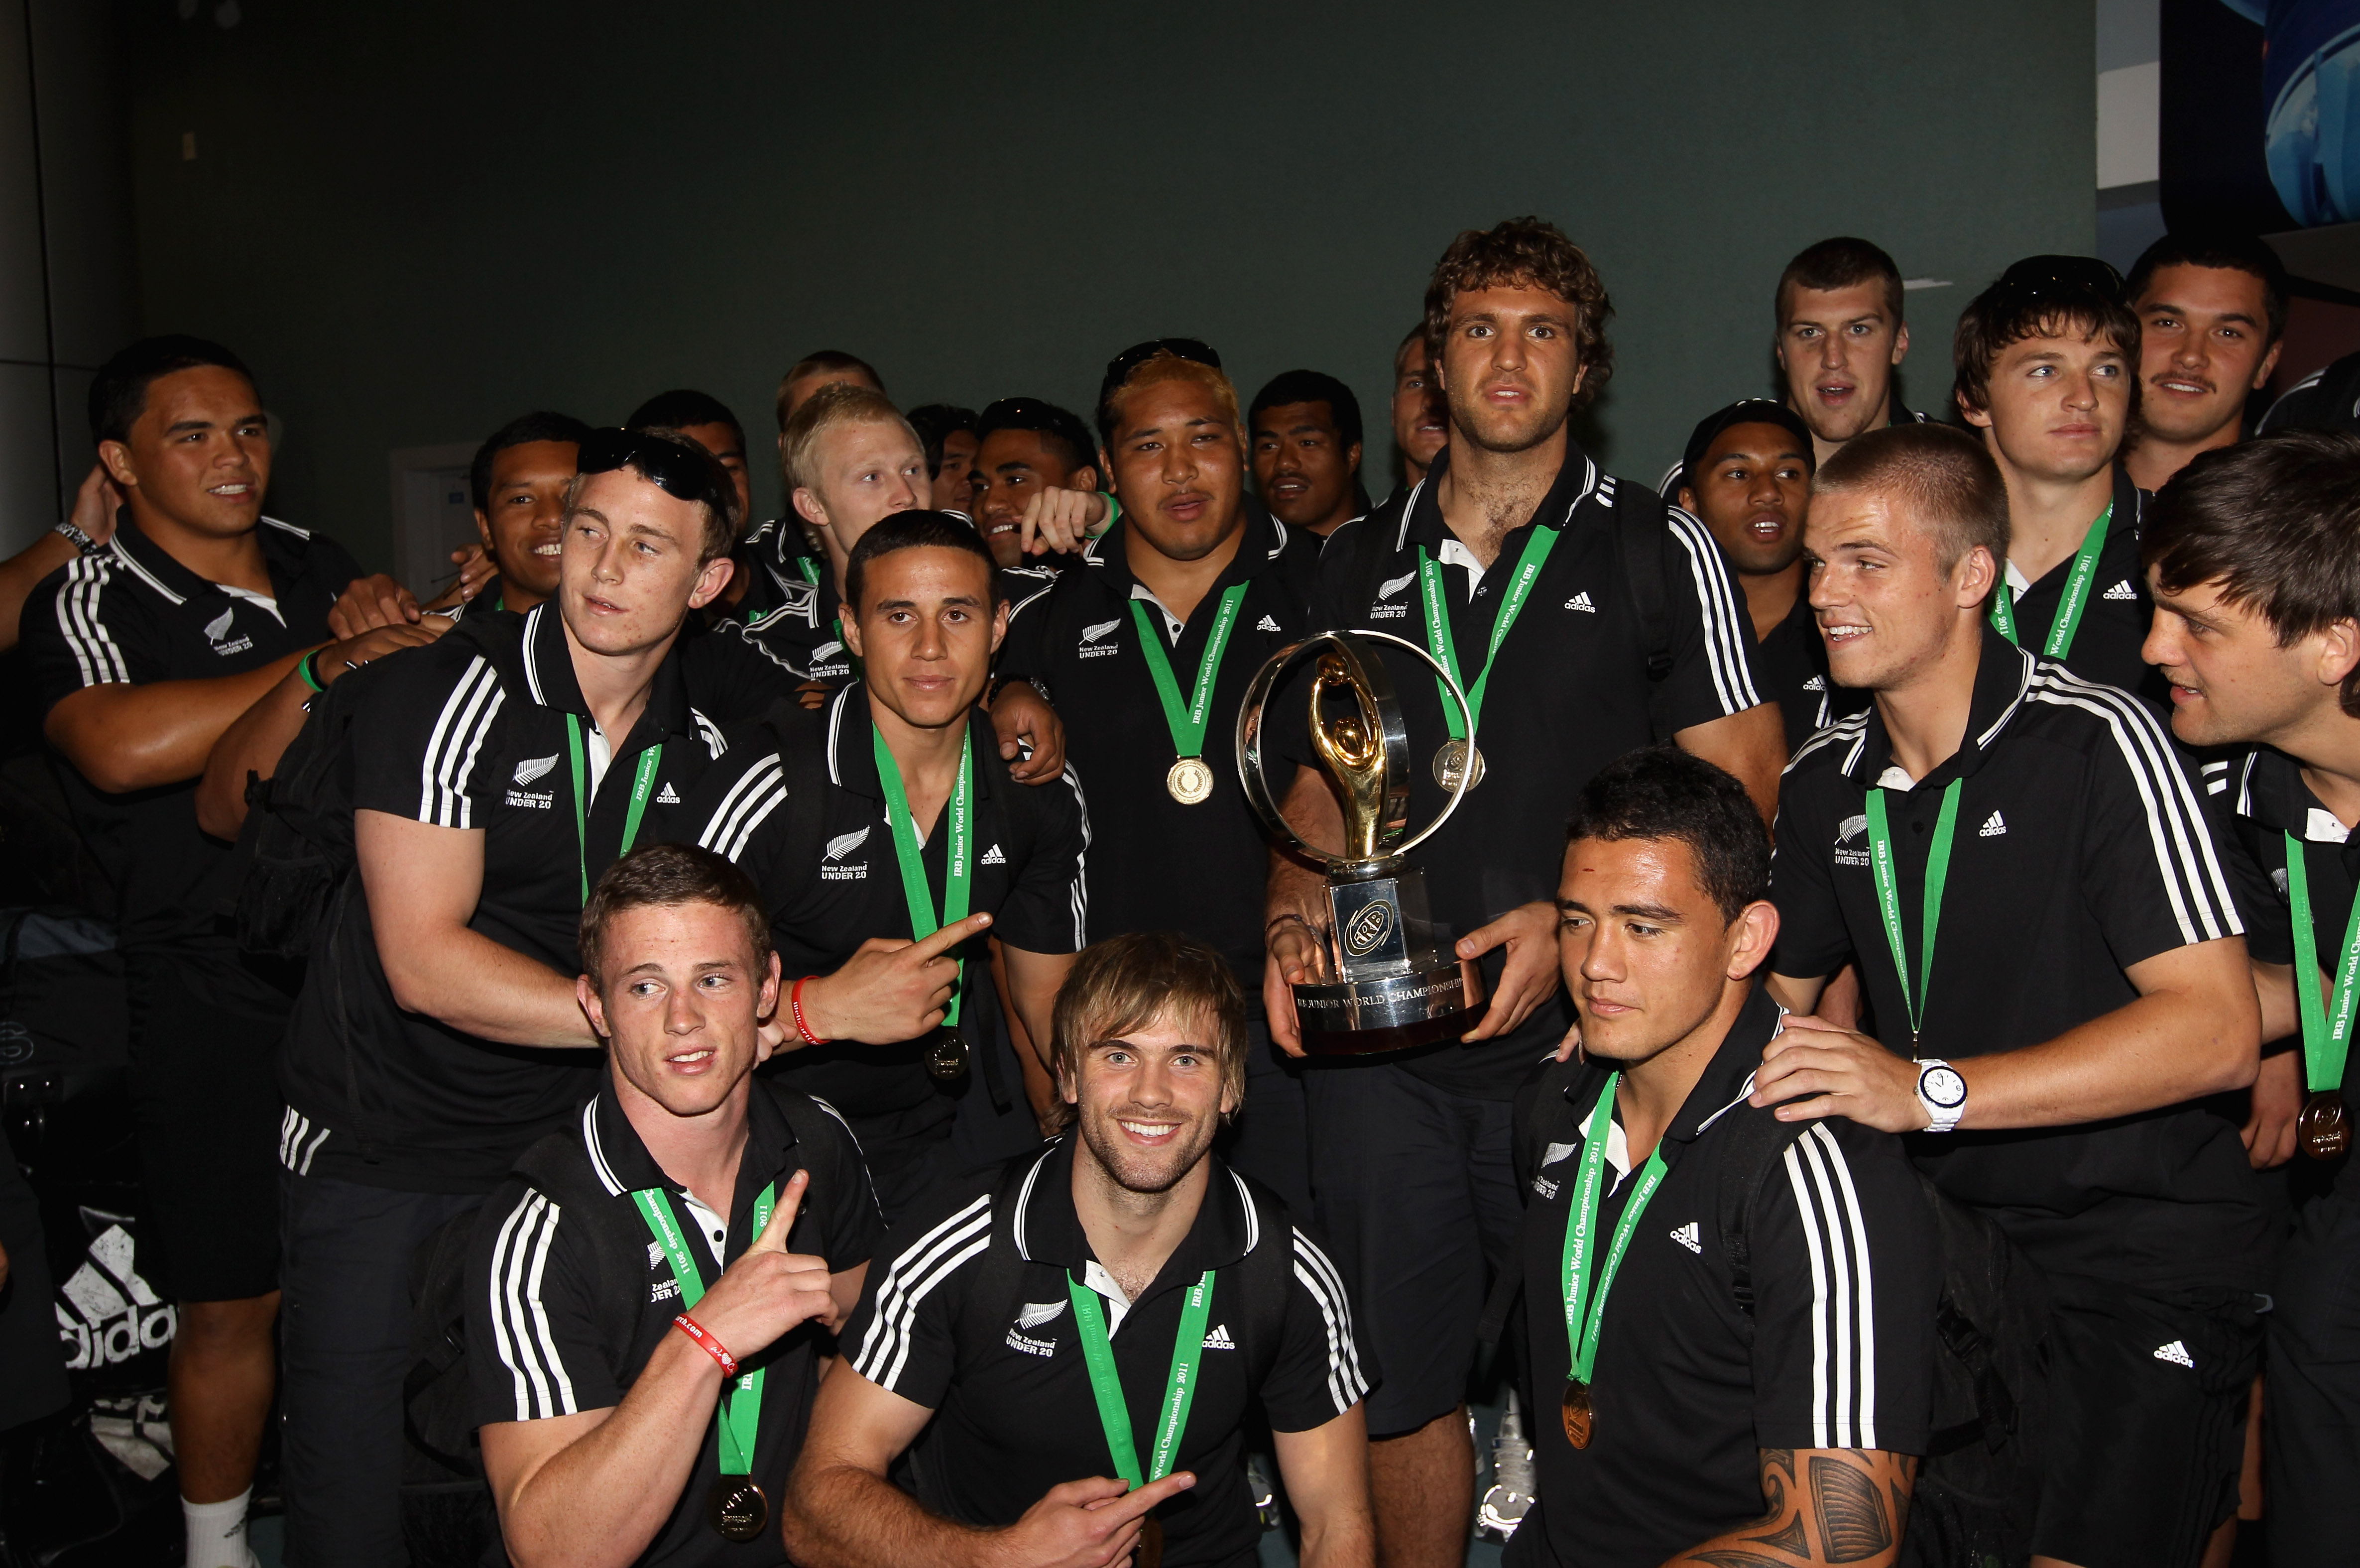 New Zealand Under 20s throughout the years